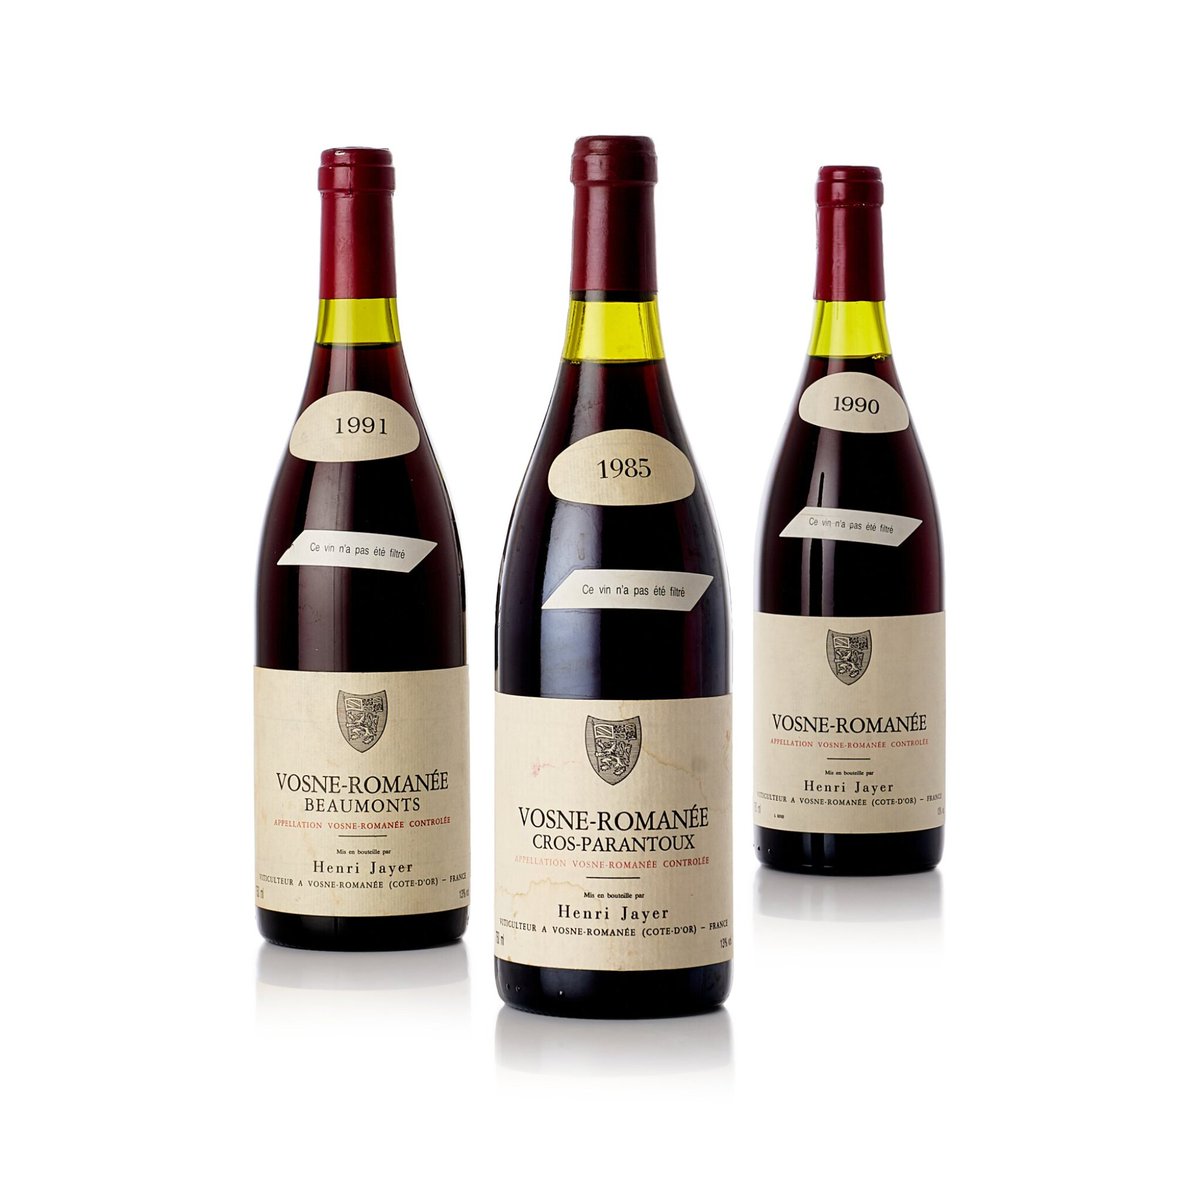 What wines are on your bucket list? I’ll start: any ‘90s Henri Jayer